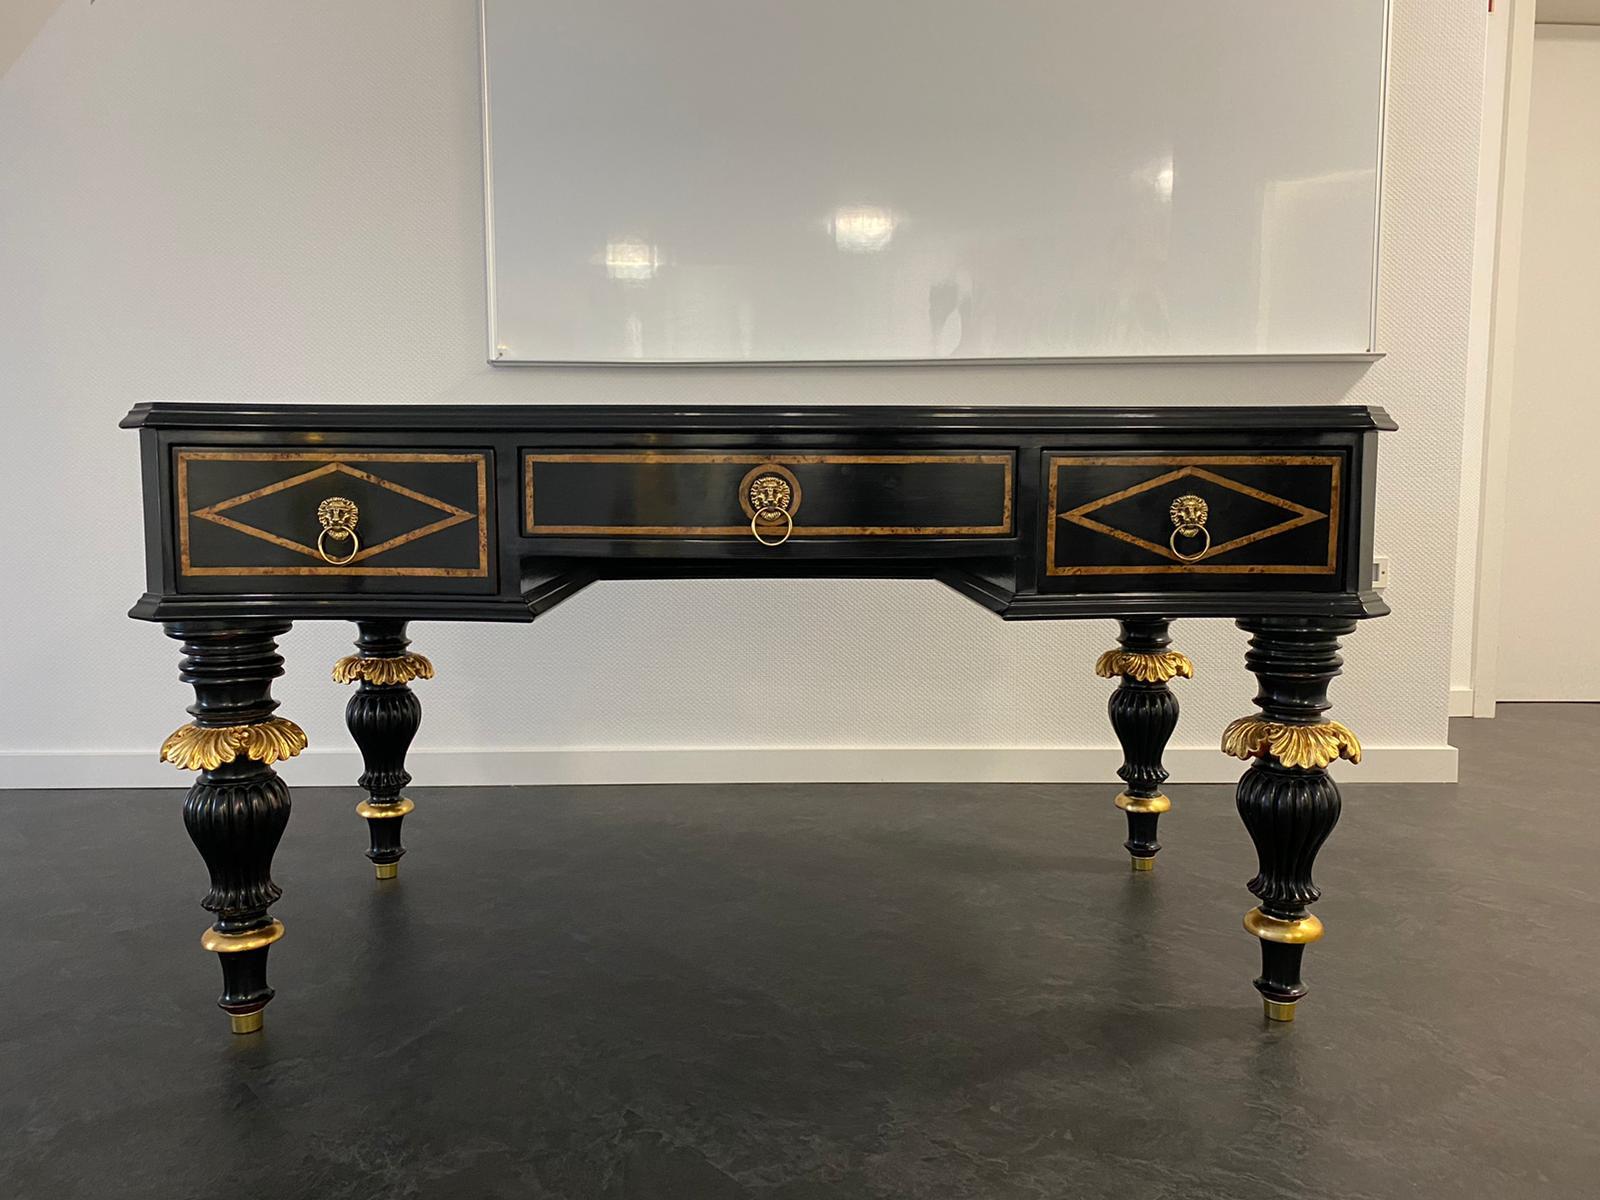 Solid softwood and beech with thread inlays. Partly ebonized and gilded. Heavily cambered, four-sided passively curved, five-tier frame with a wide knee compartment on finely carved baluster-shaped legs ending in sabots. Slightly protruding, from